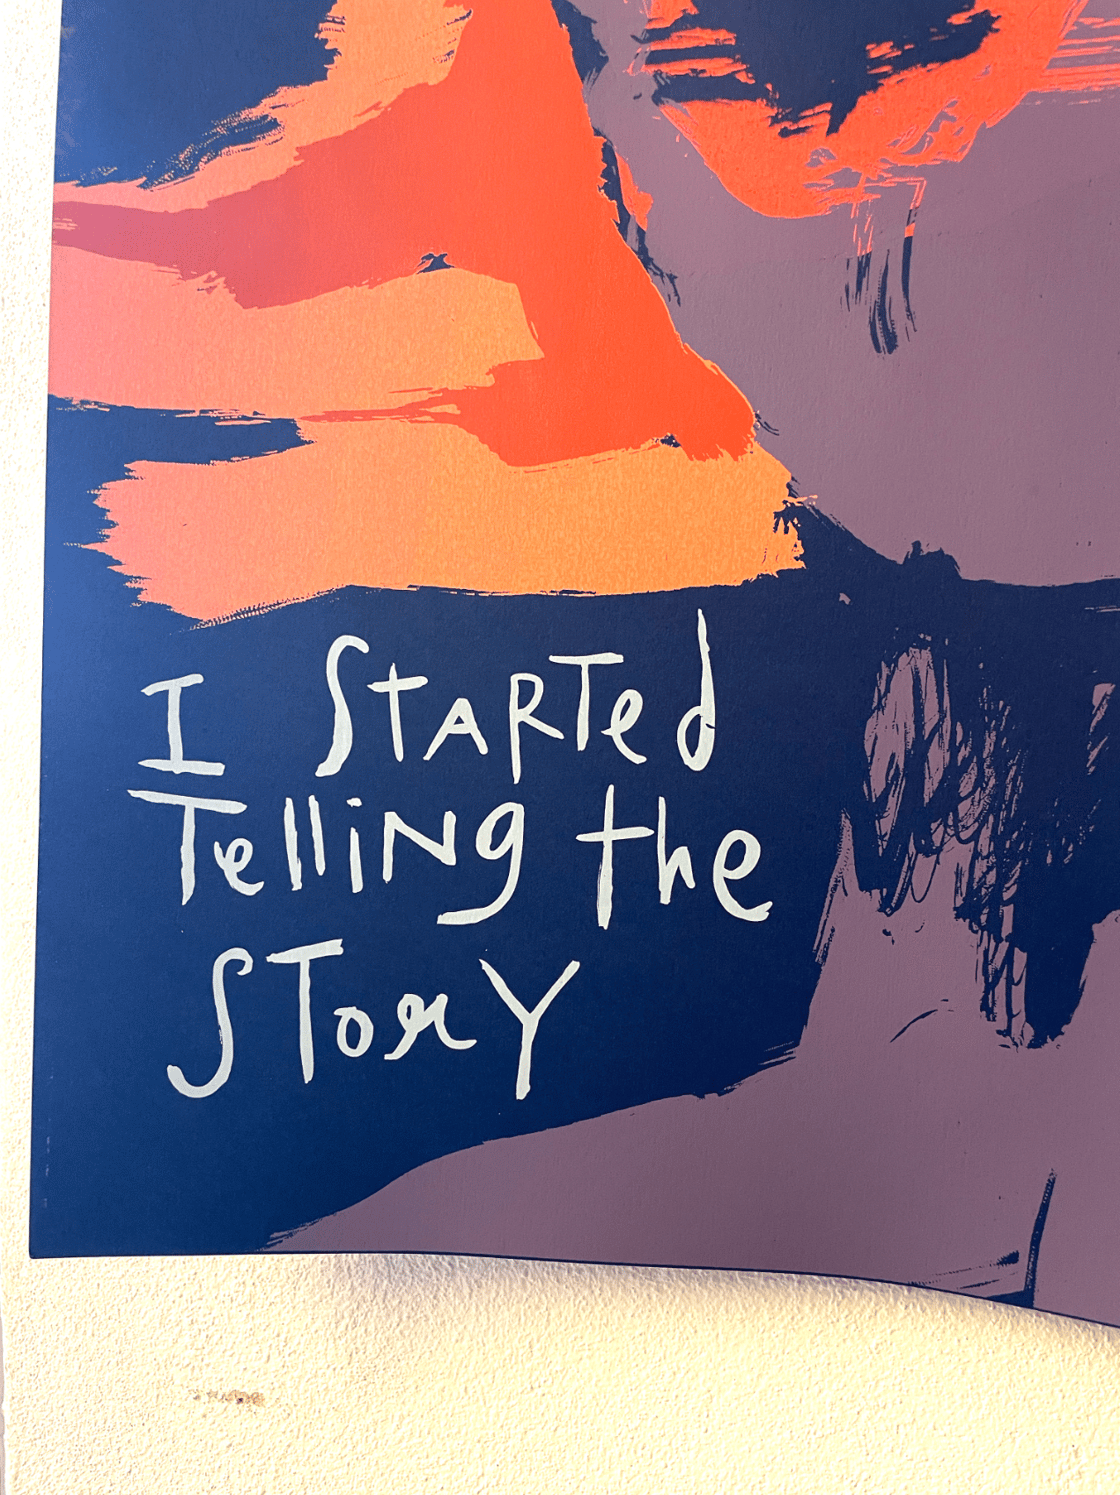 Image of i started telling the story, without knowing the end.